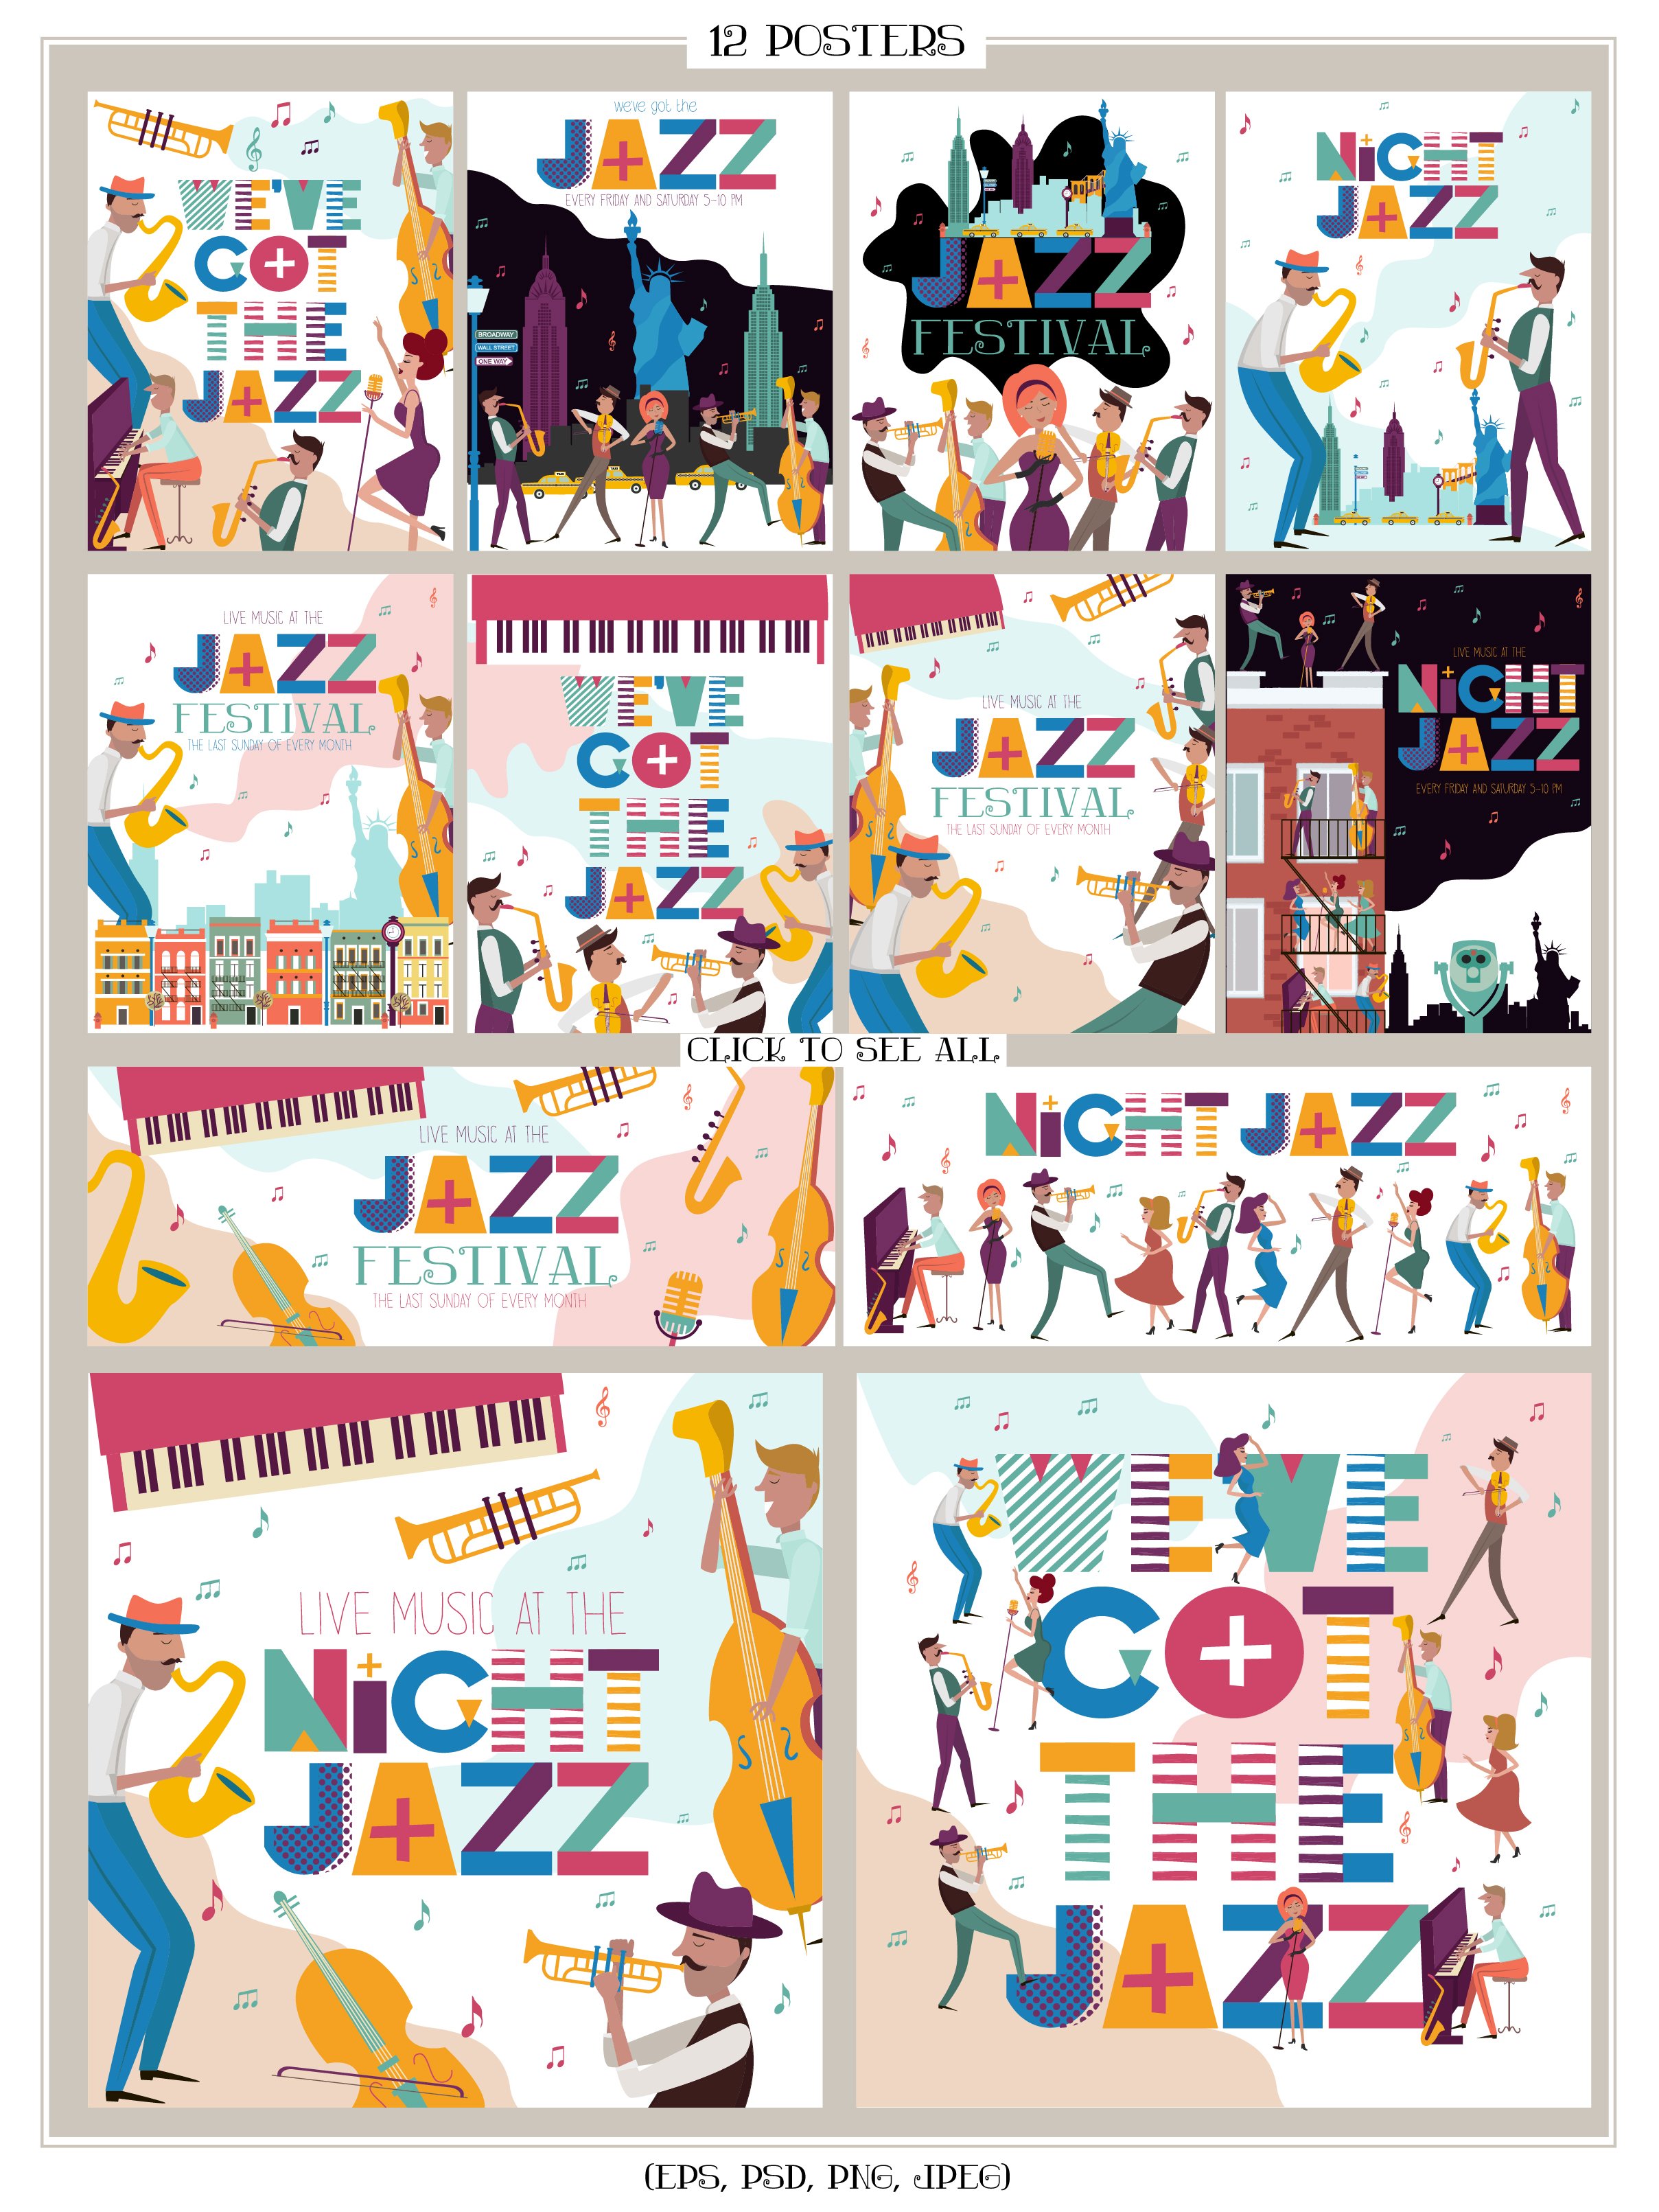 Night Jazz in New York preview image.